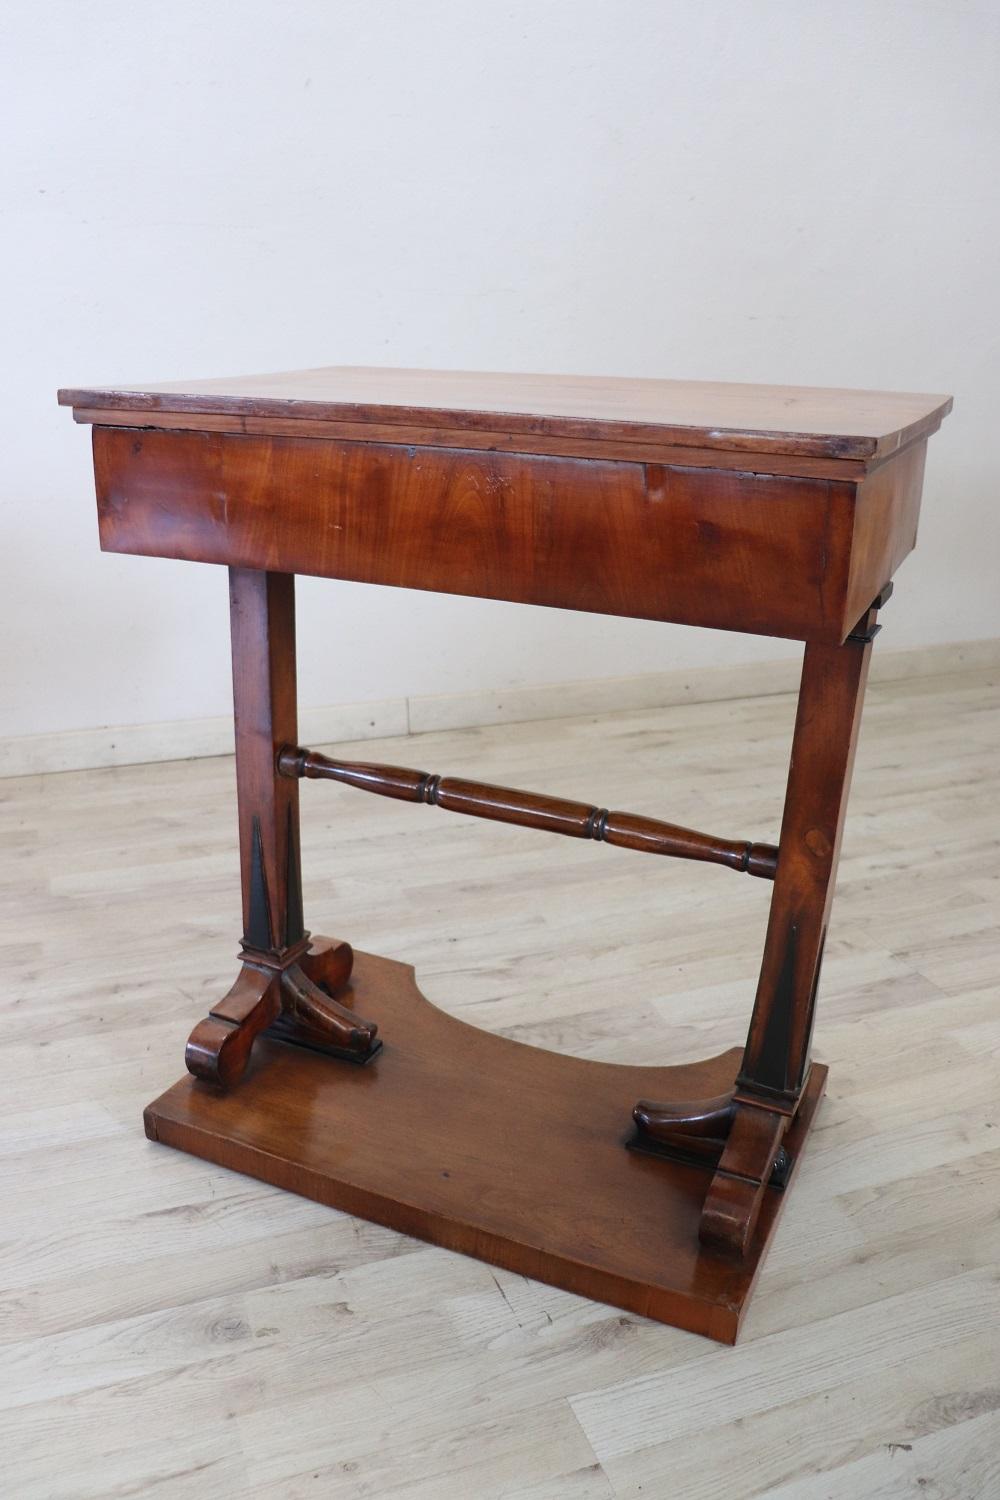 Early 19th Century Empire Cherry Wood Antique Side Table with Internal Desk Top 3